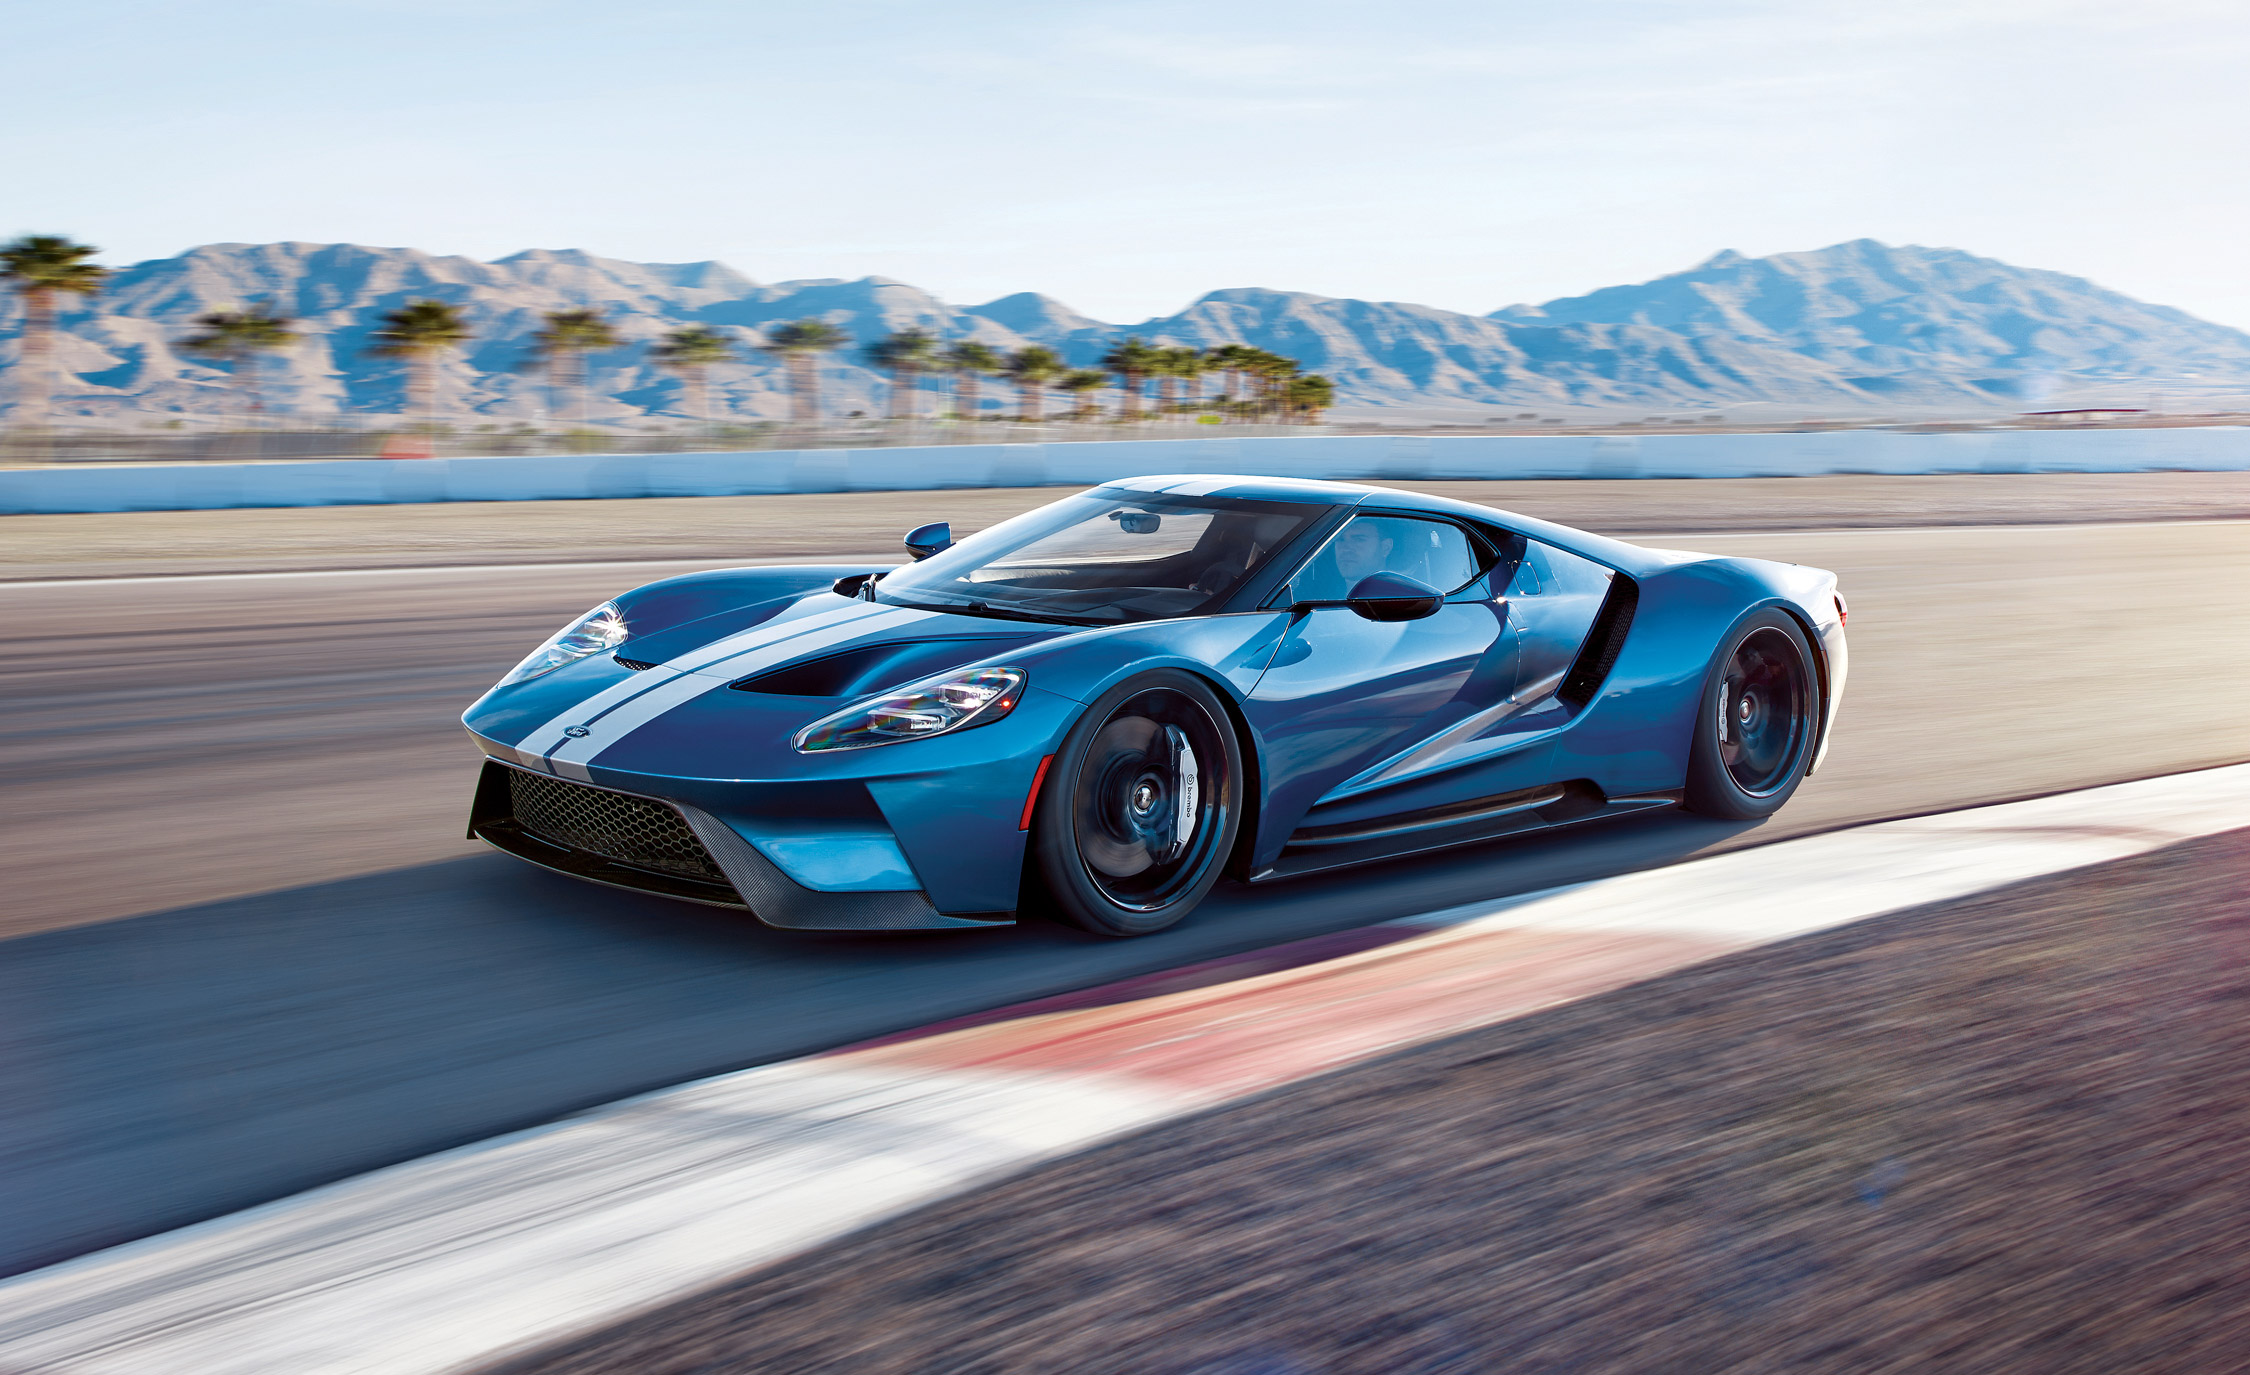 Riding in my sports car. Ford gt 2017. Ford gt40 2020. Ford gt40 2019. Ford gt 2020 гиперкар.